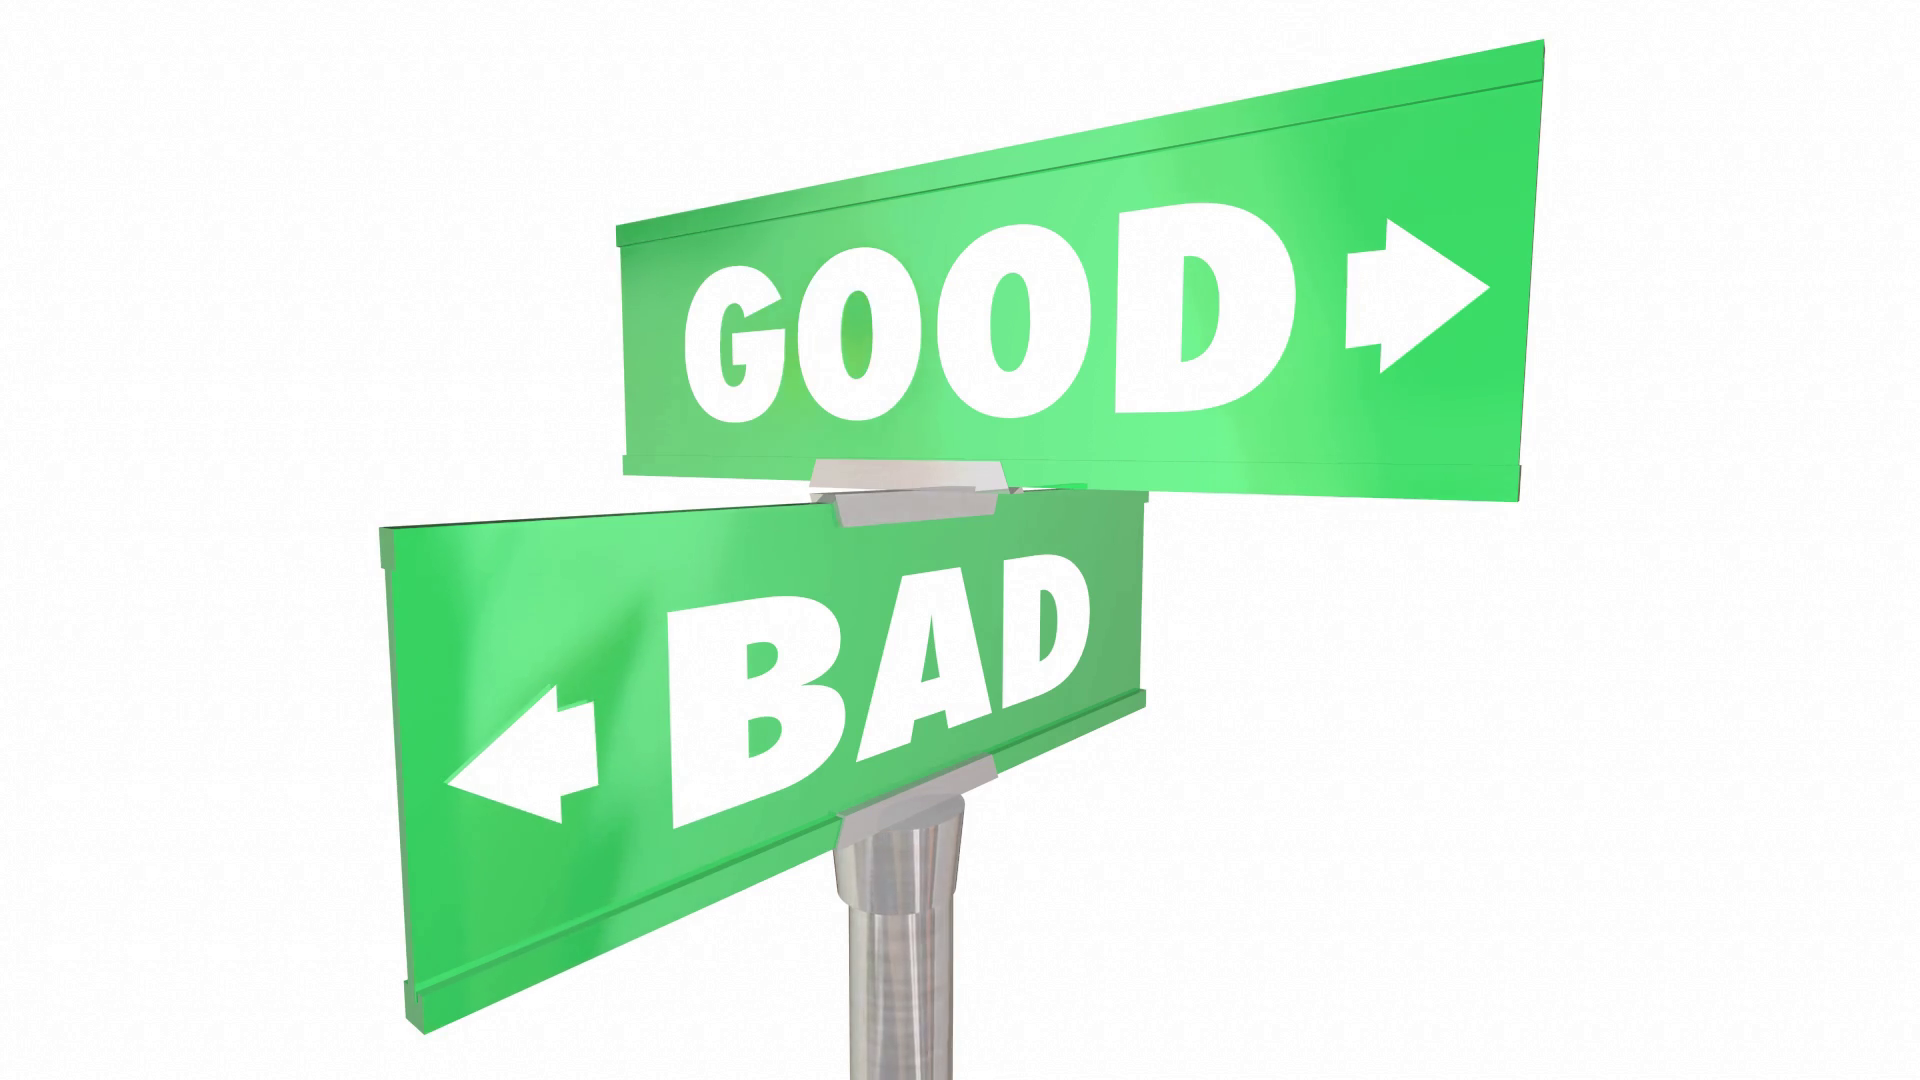 Good Vs Bad Choices Ideas Road Street Signs 3D Animation Motion Background   Videoblocks - Street Signs, Transparent background PNG HD thumbnail